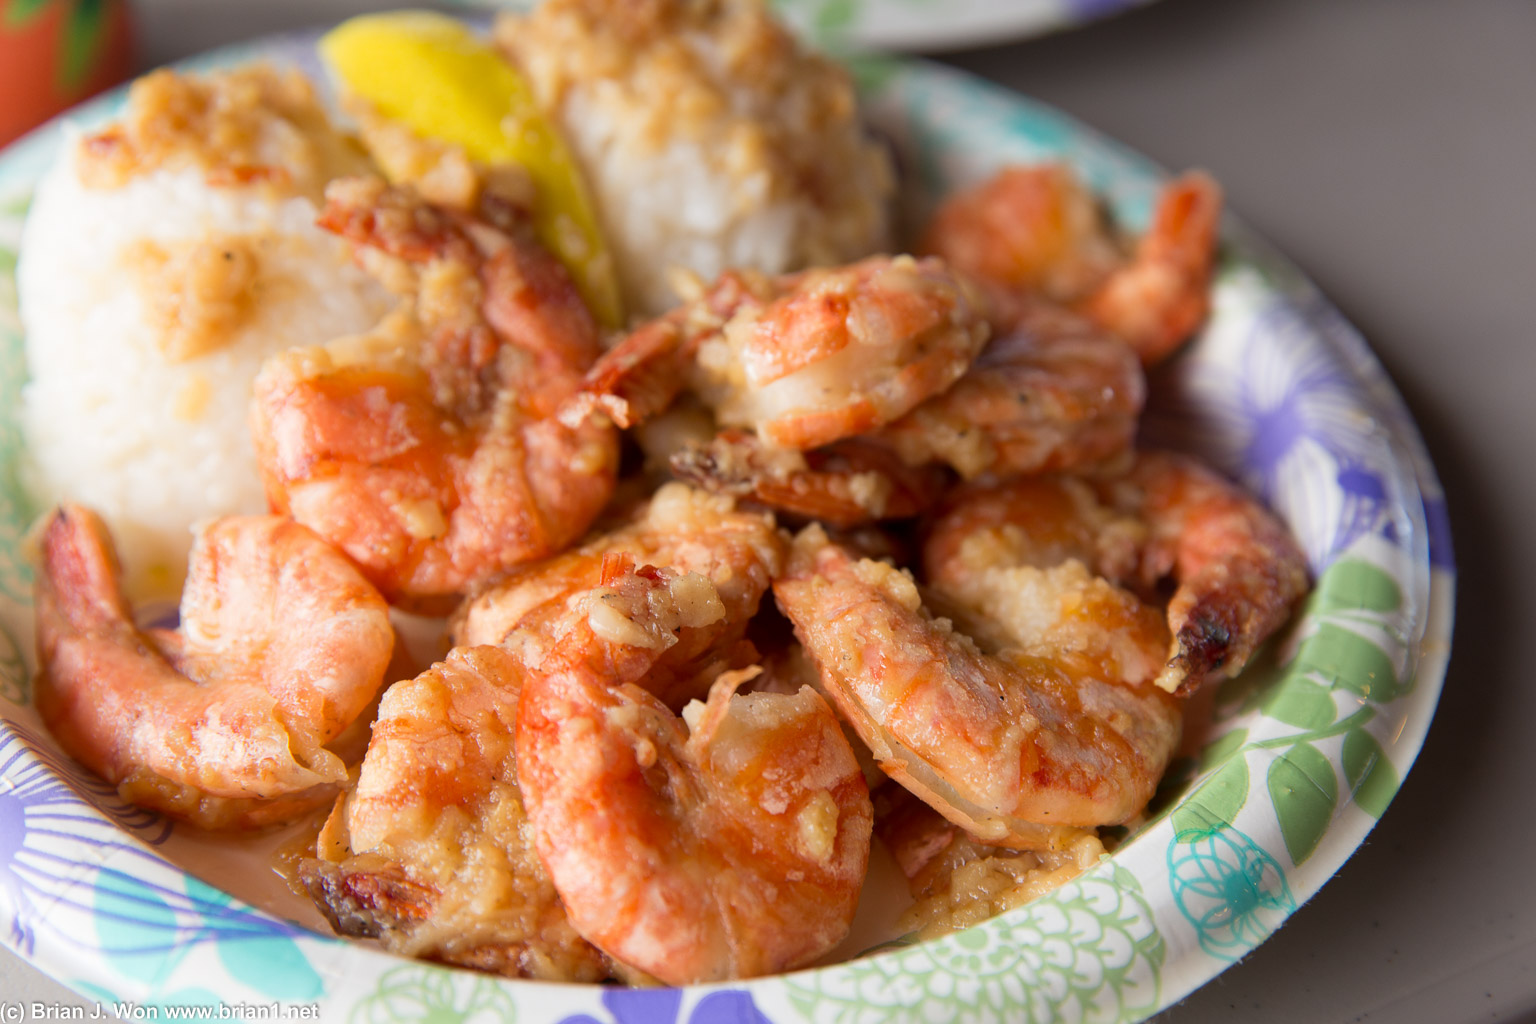 #1, garlic shrimp and rice. Pretty tasty, a little overcooked. Maybe Romy's or Famous Kahuku Shrimp Truck next time?